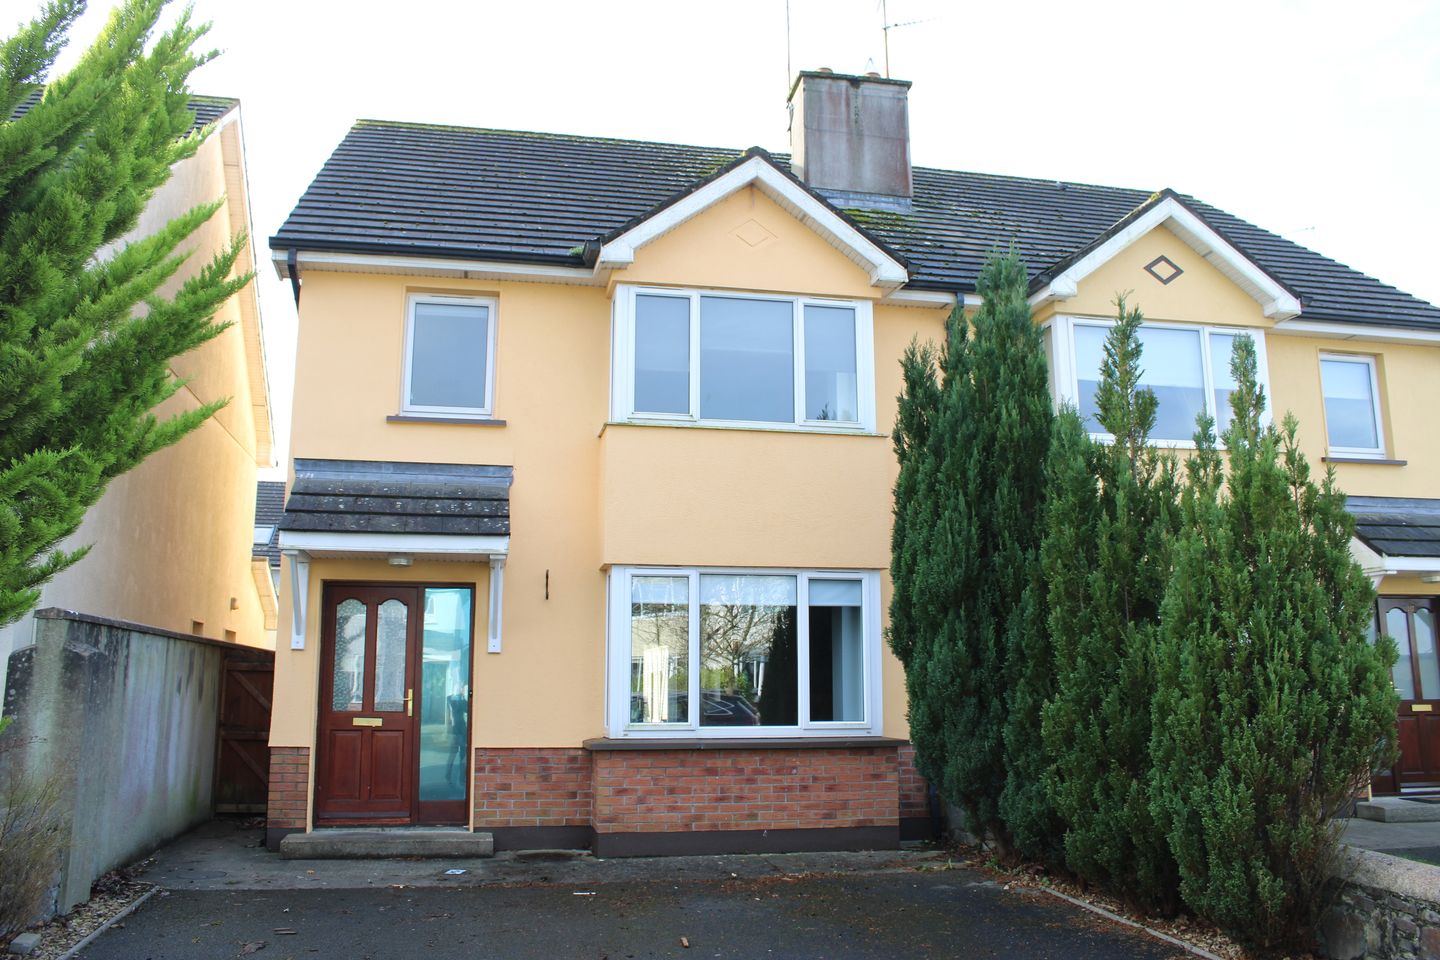 116 Palace Fields, Tuam, Co. Galway, H54NX98